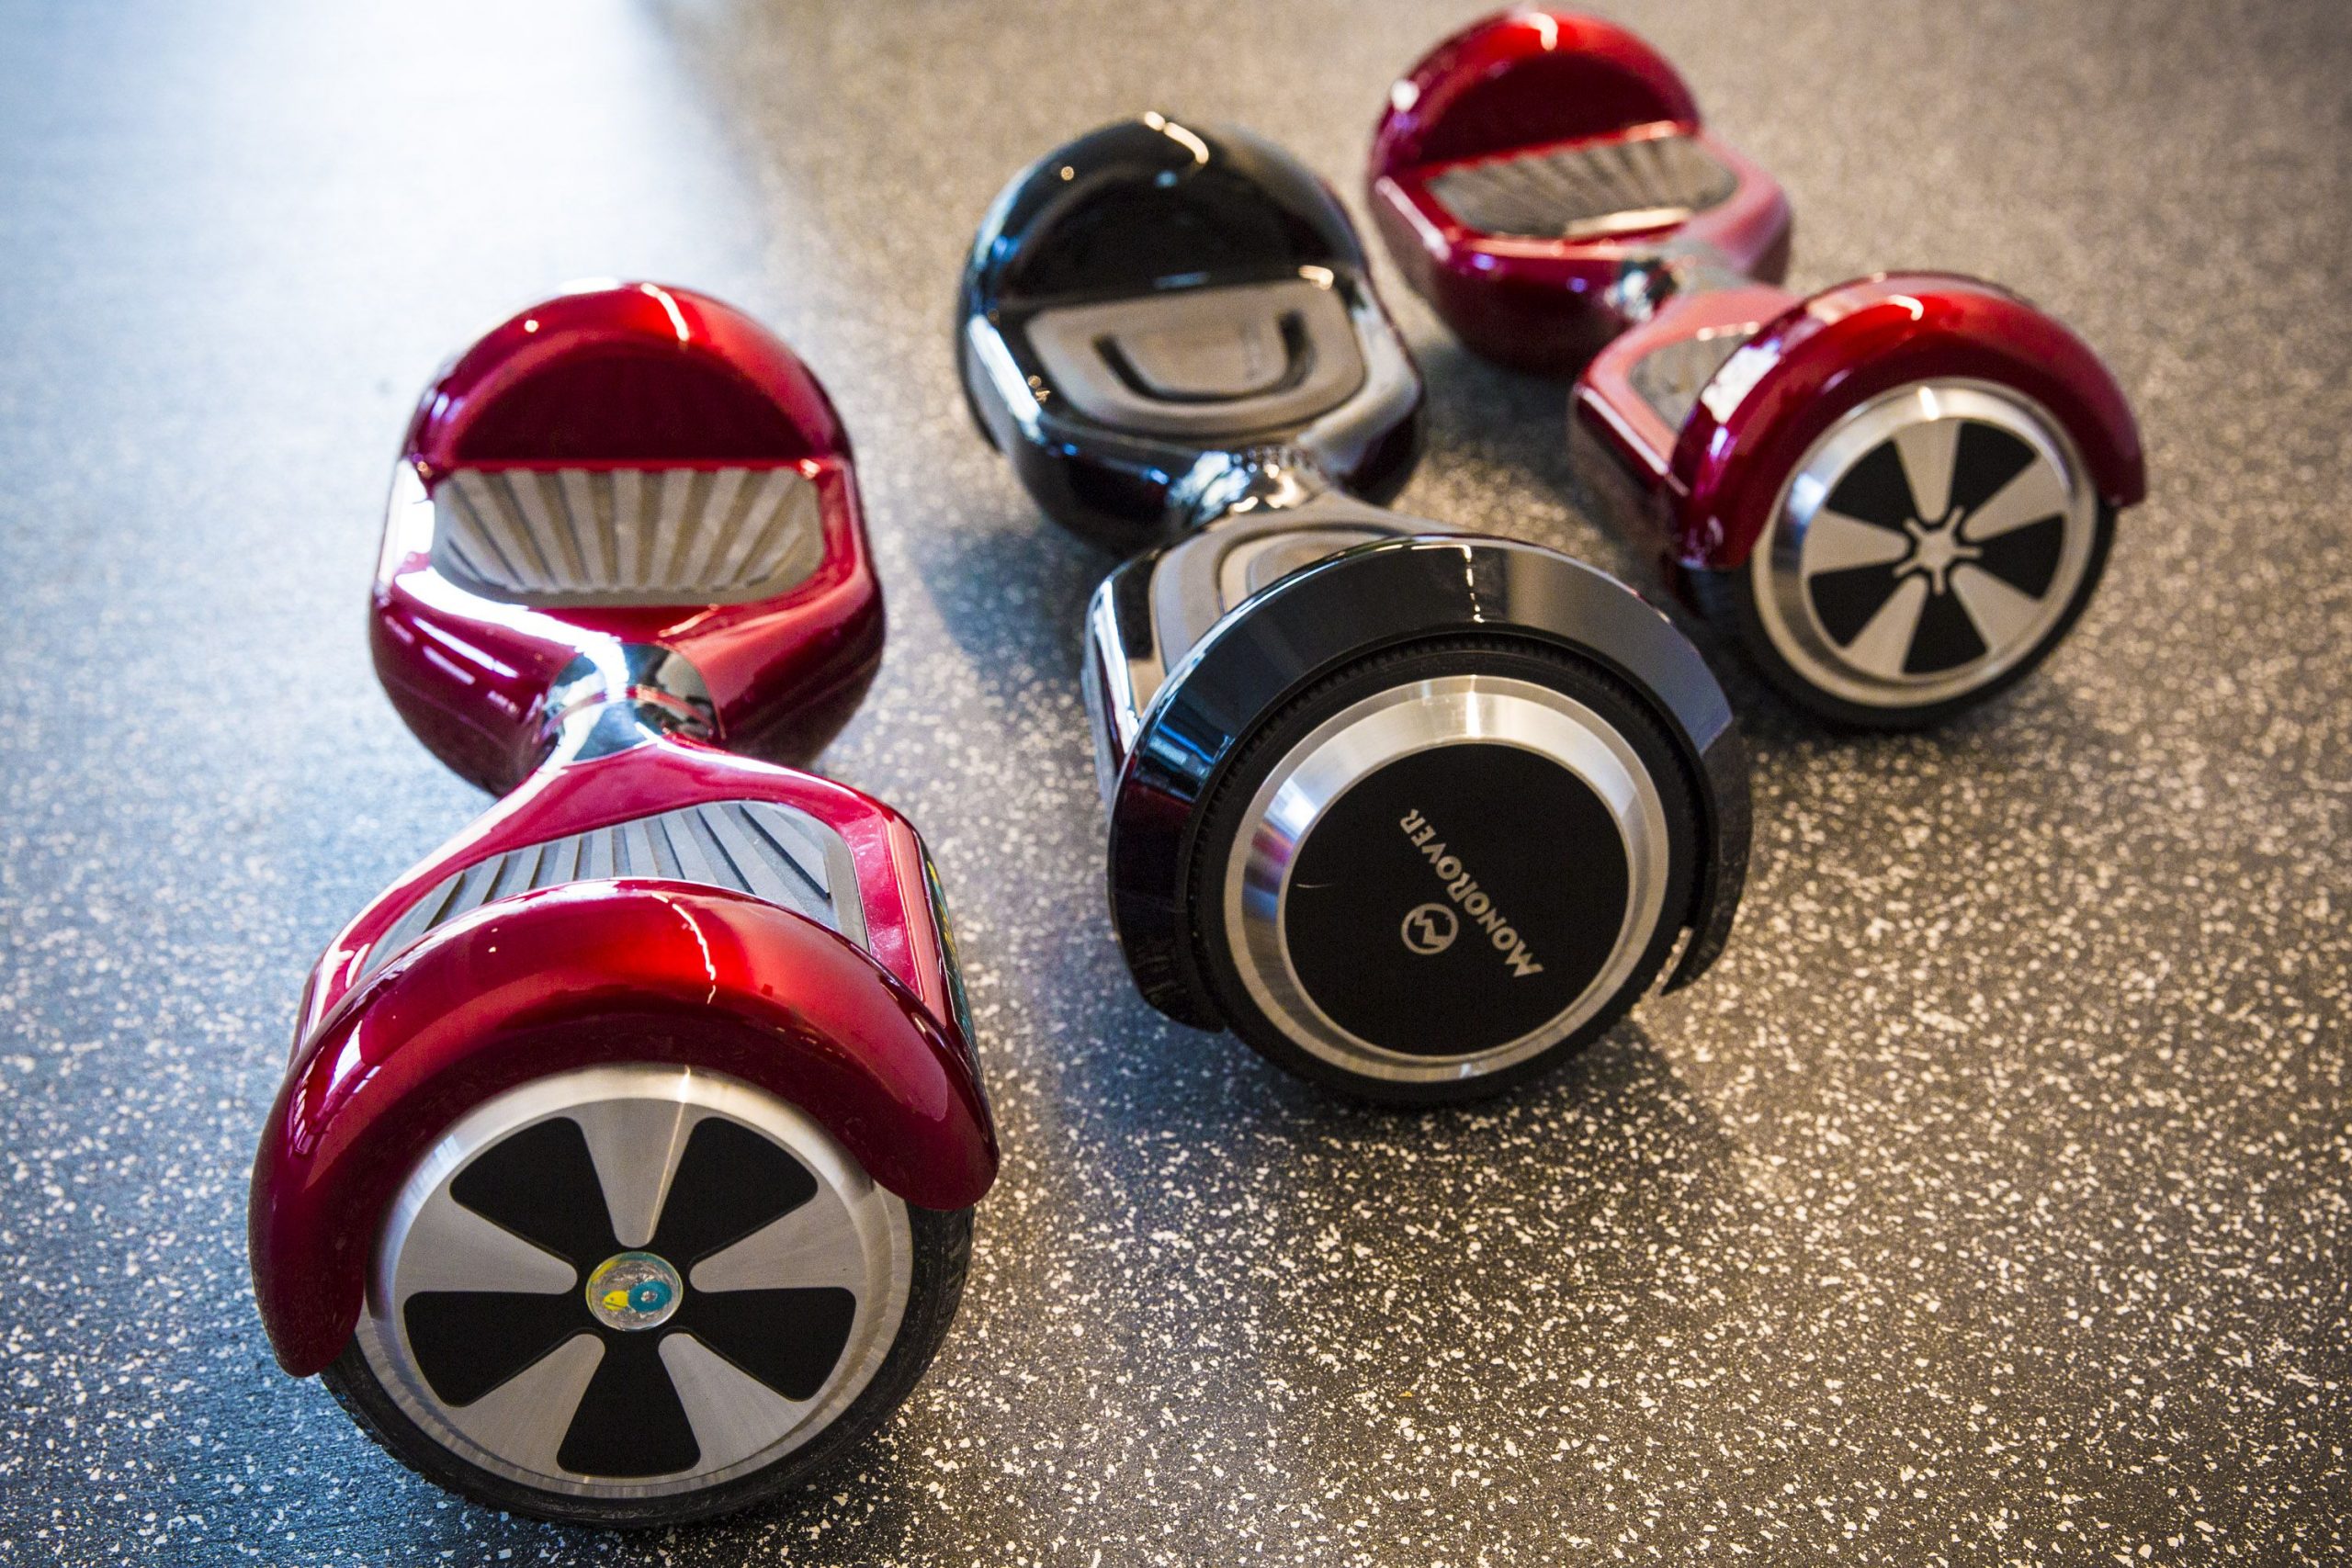 Know the Types of Hoverboards Before you Buy One